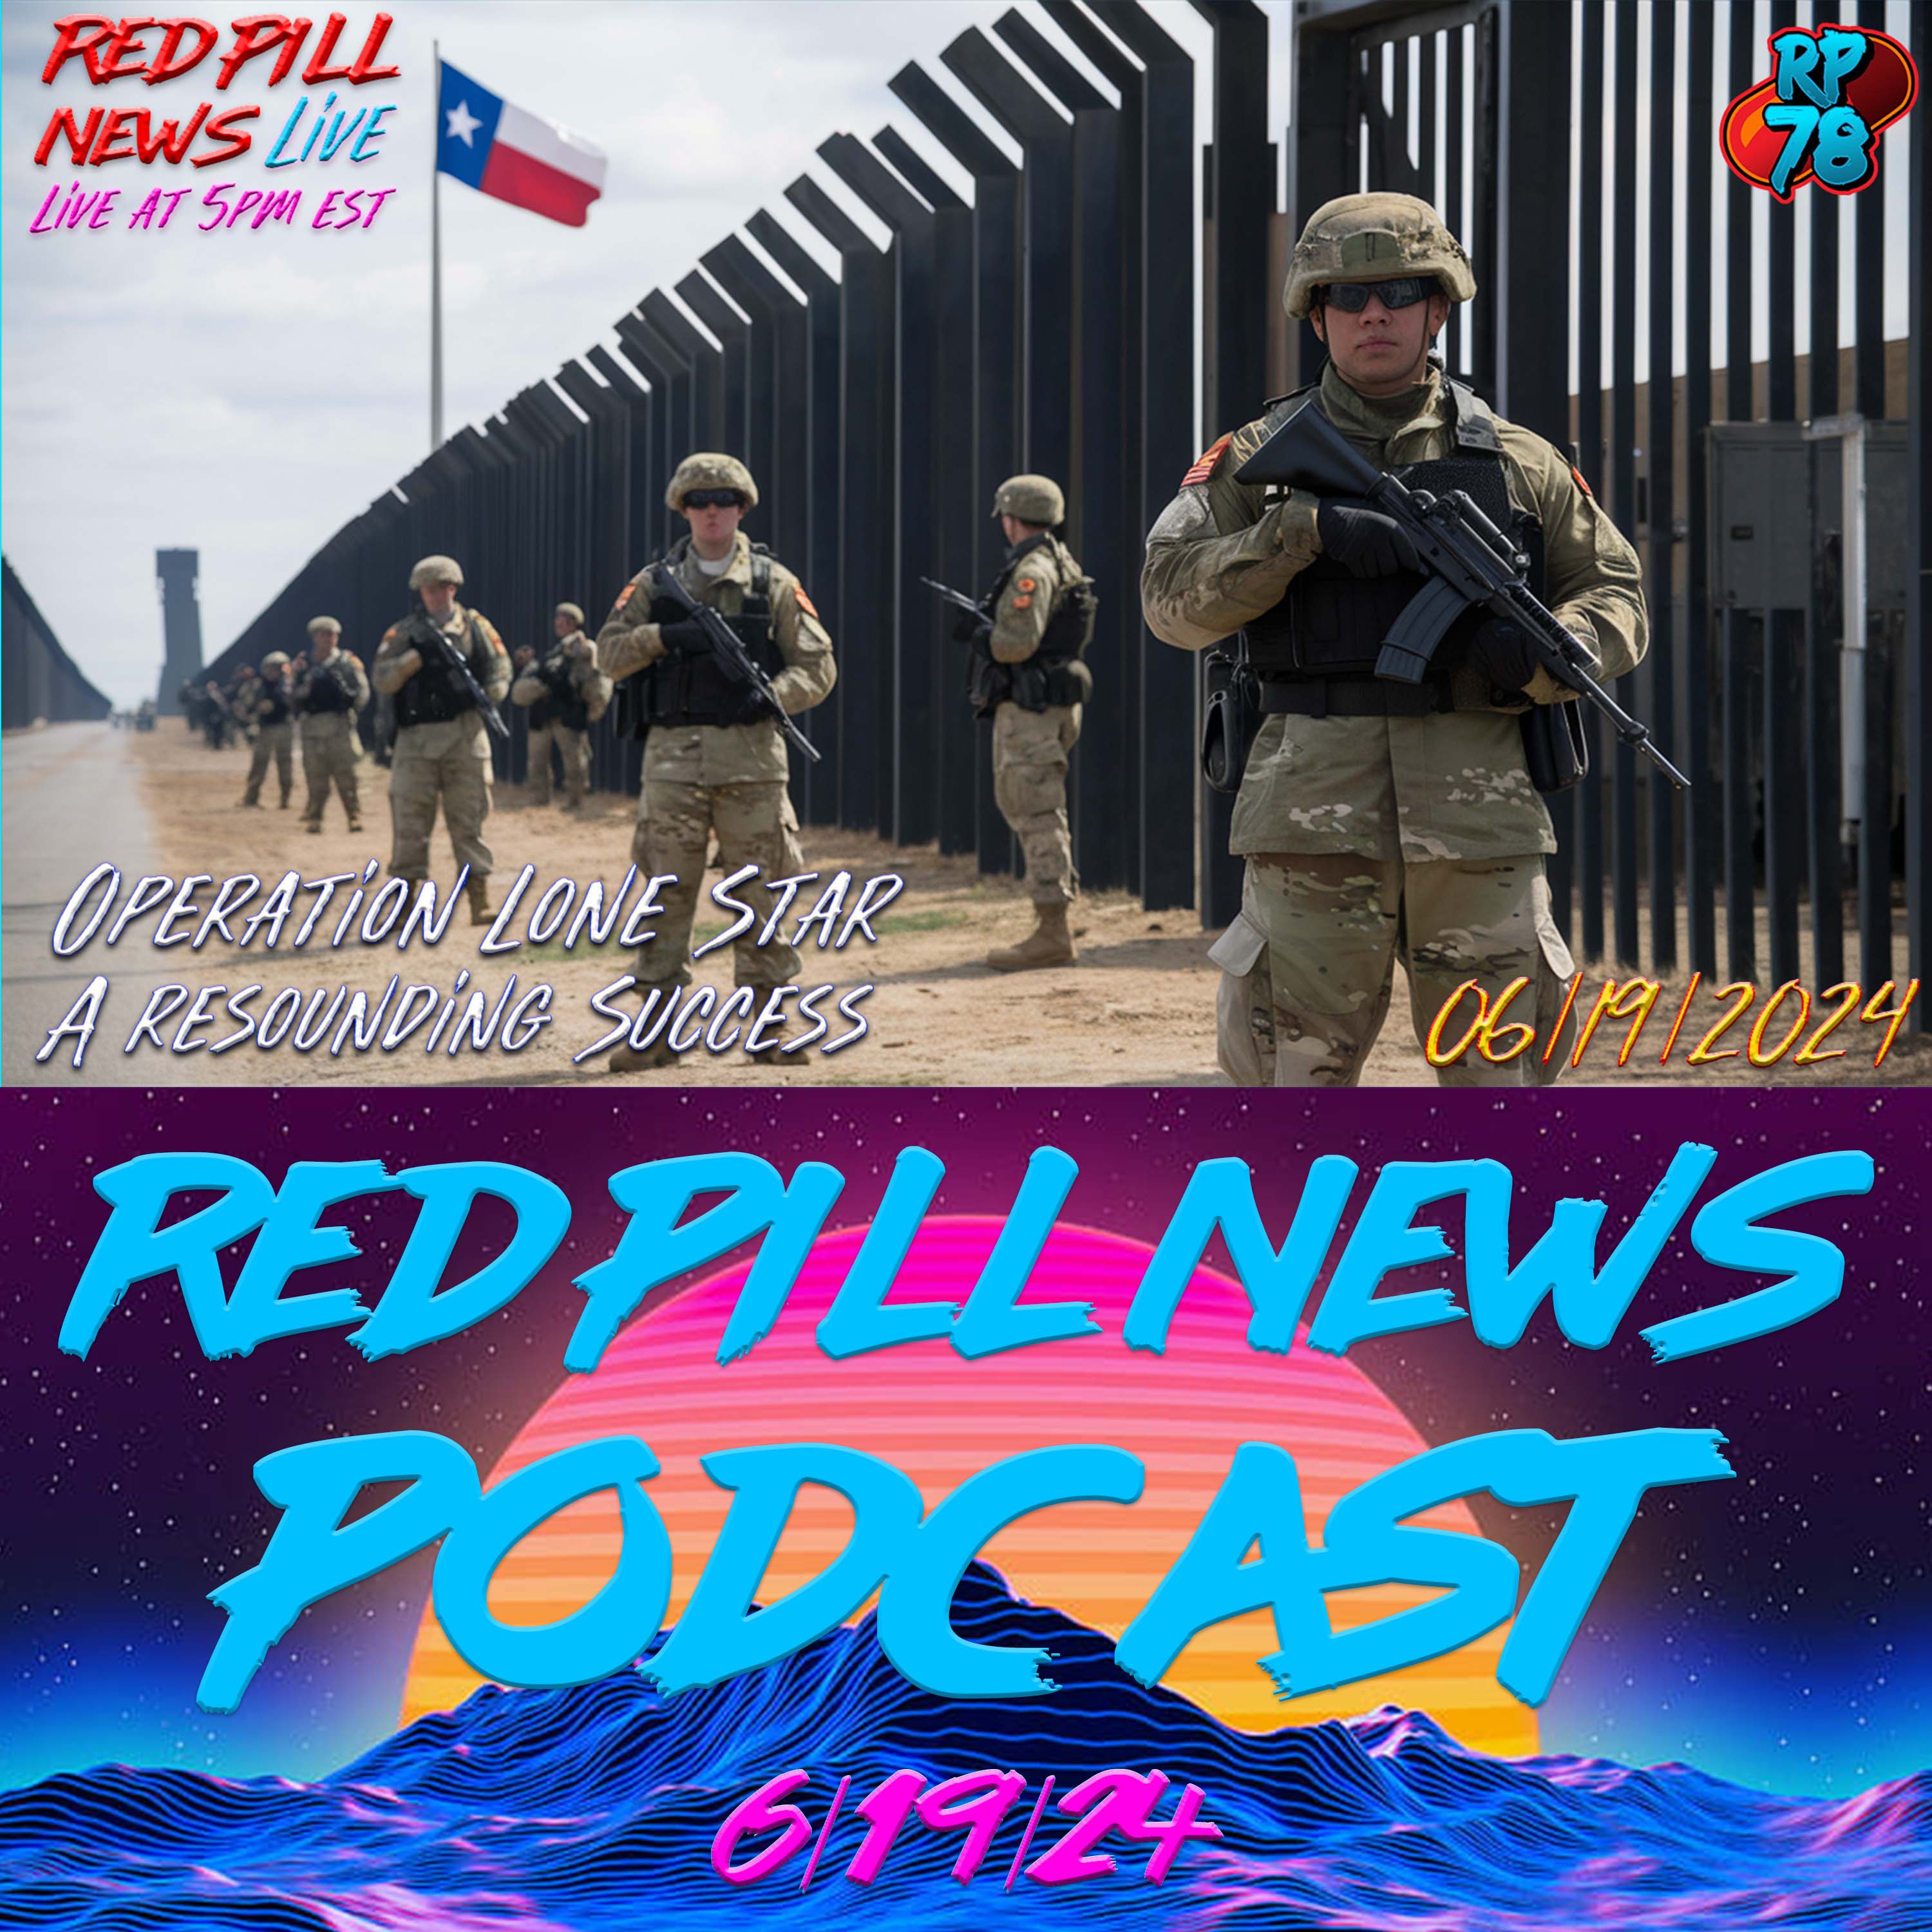 Feds Humiliated By Texas Operation Lone Star on Red Pill News Live